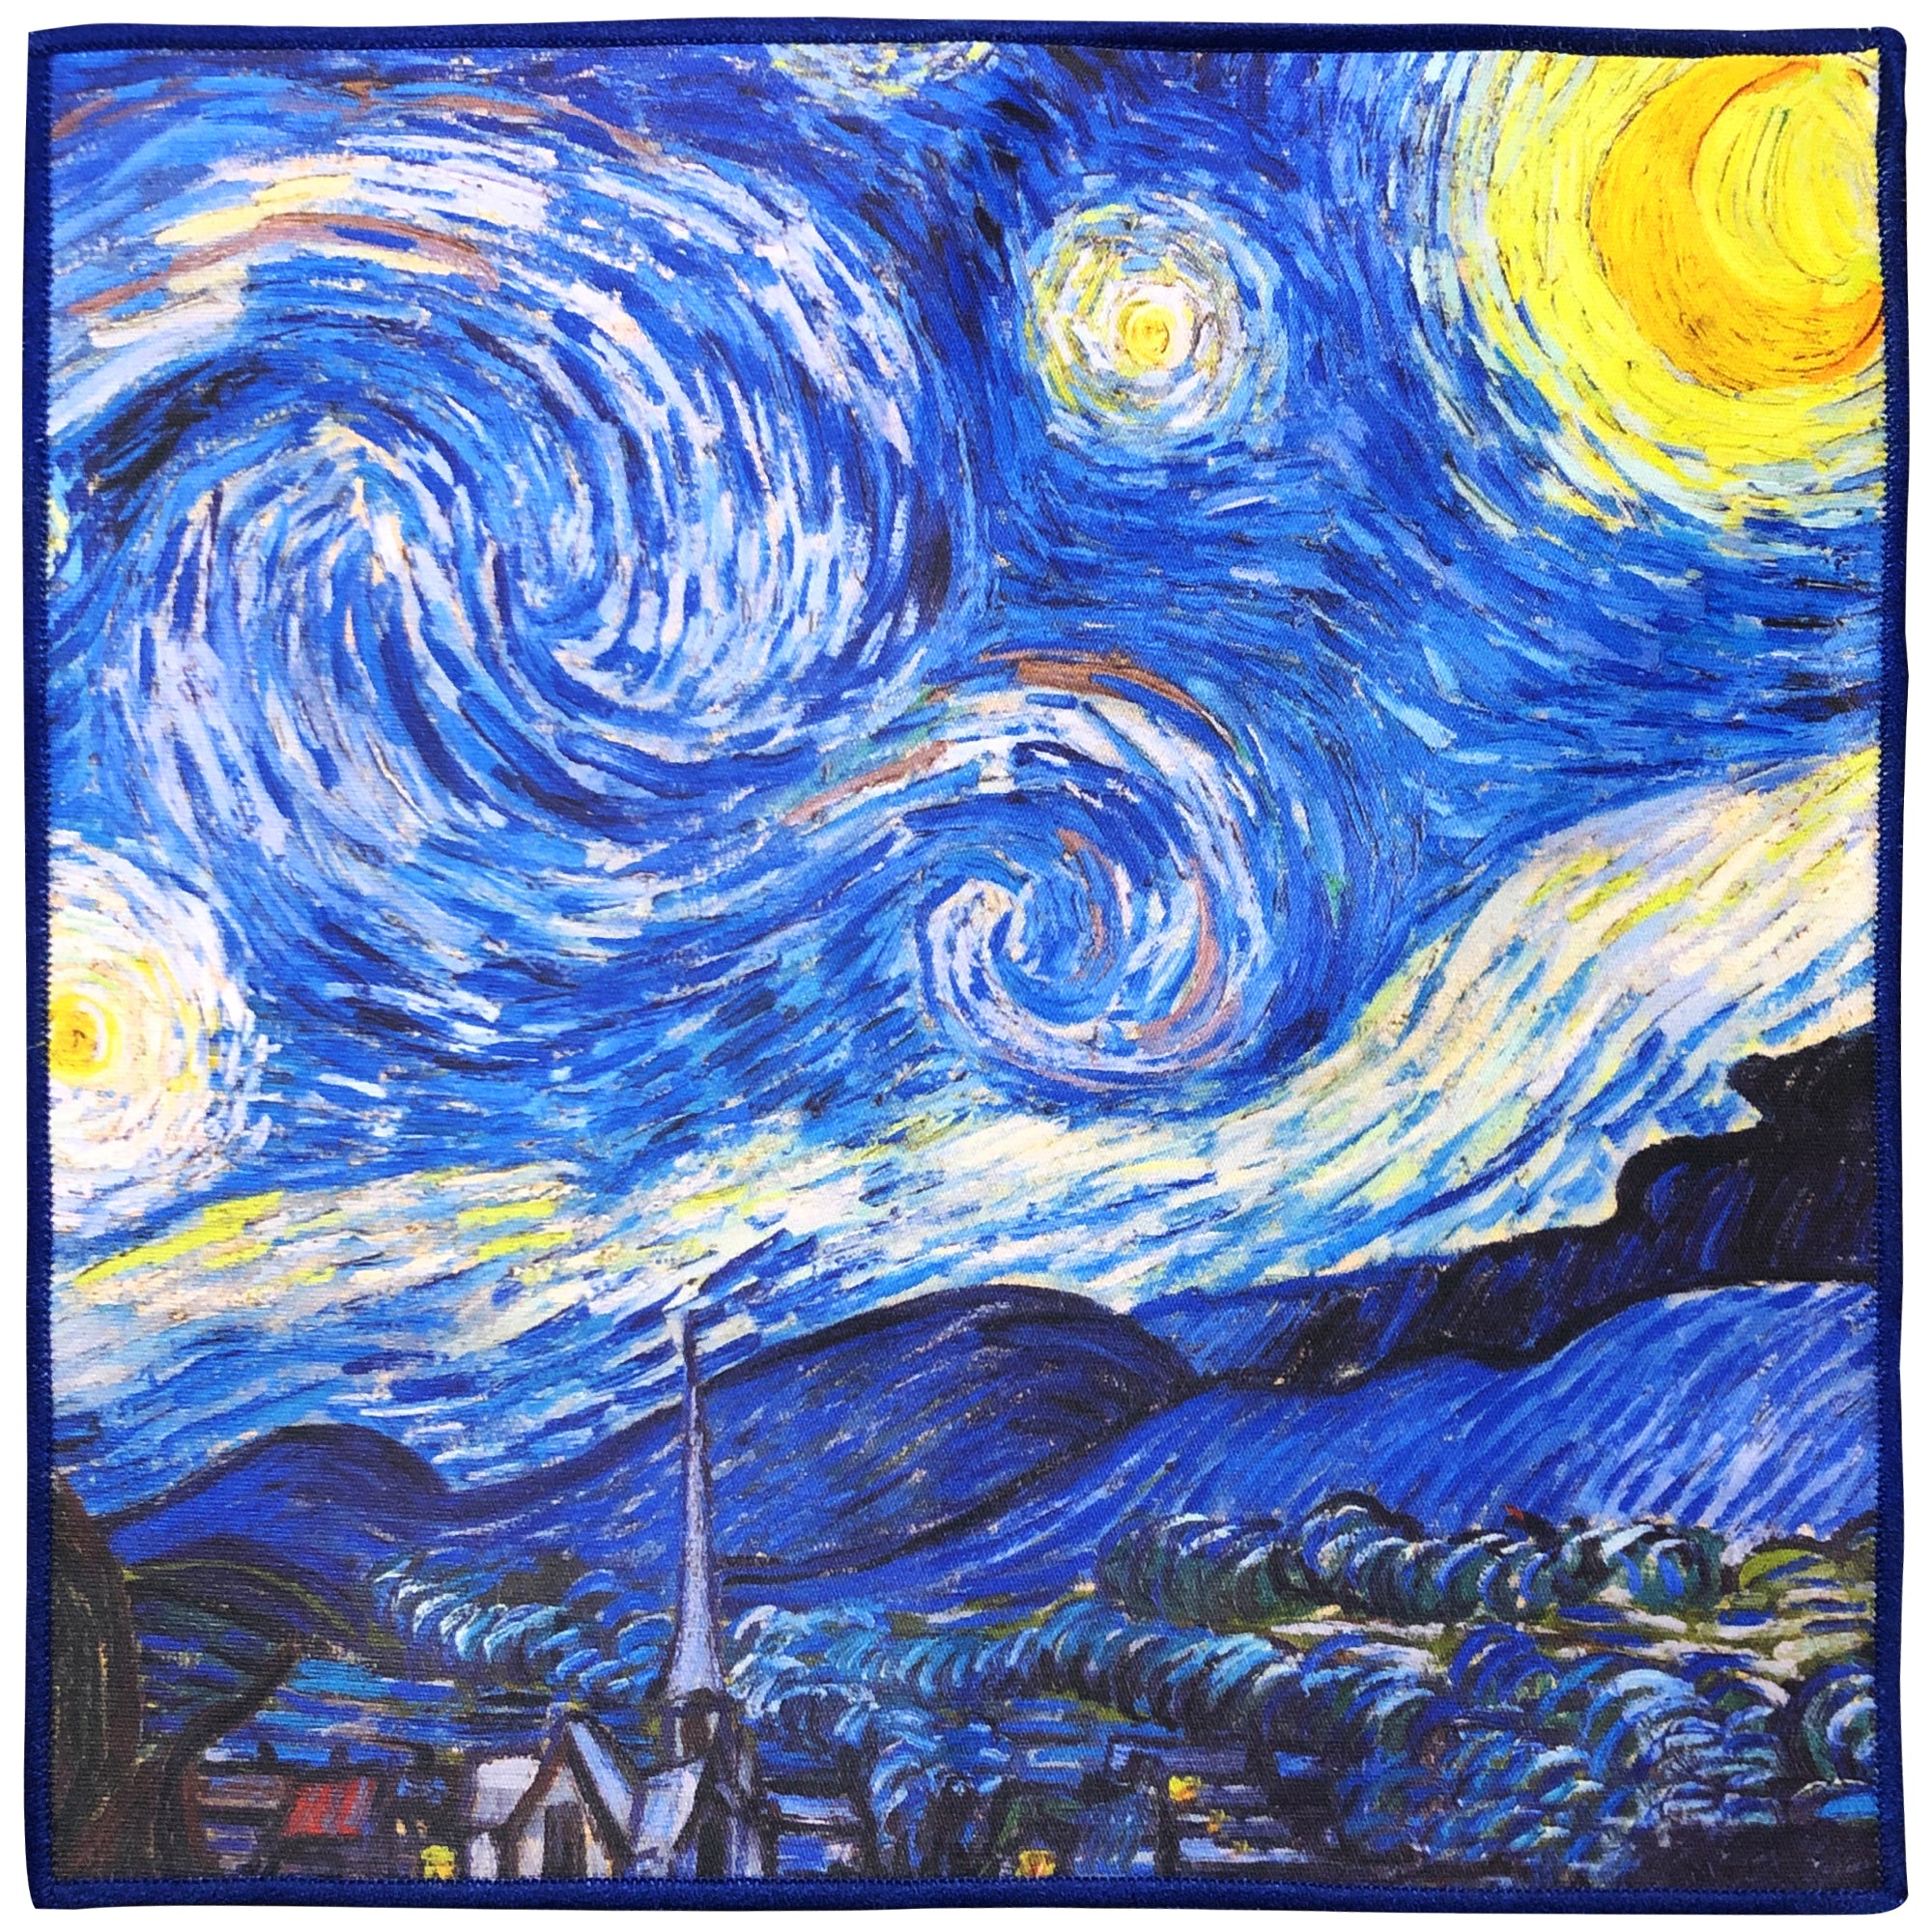 [6 Pack] Vincent Van Gogh "The Starry Night" - Art Collection - Ultra Premium Quality Microfiber Cleaning Cloths